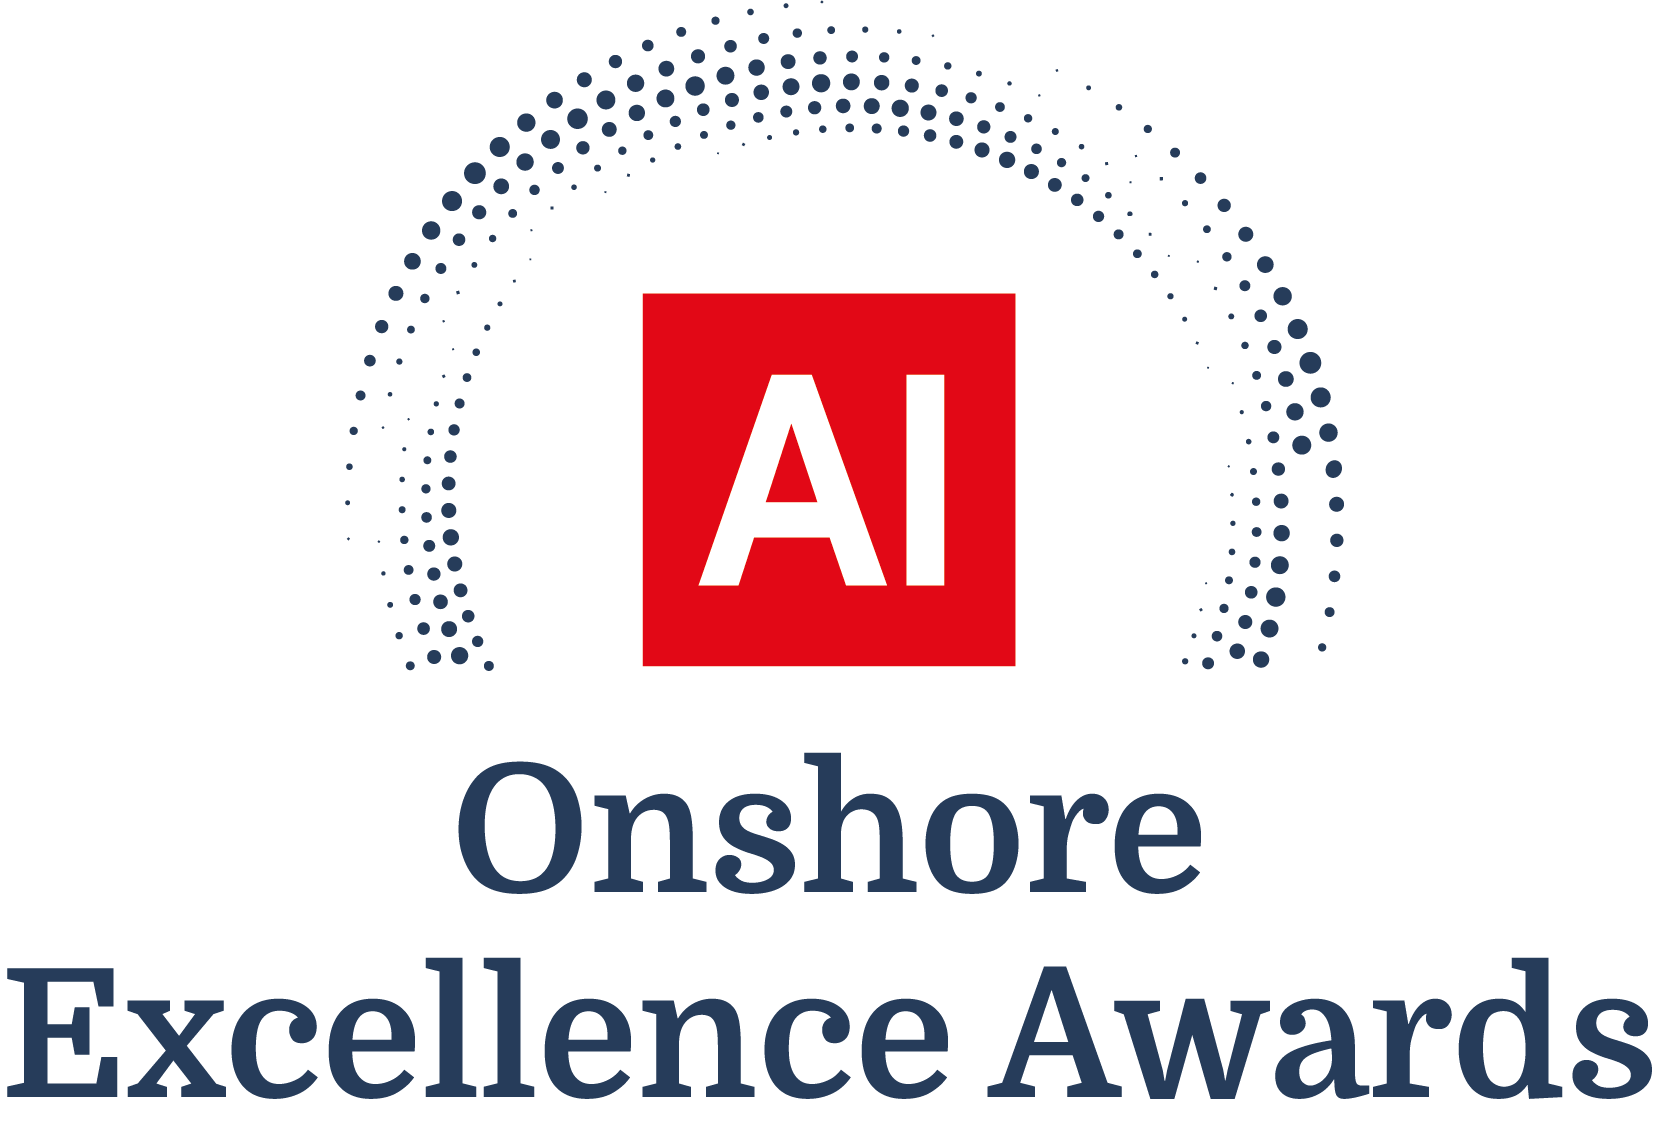 Current Award Logo - Onshore Excellence Awards